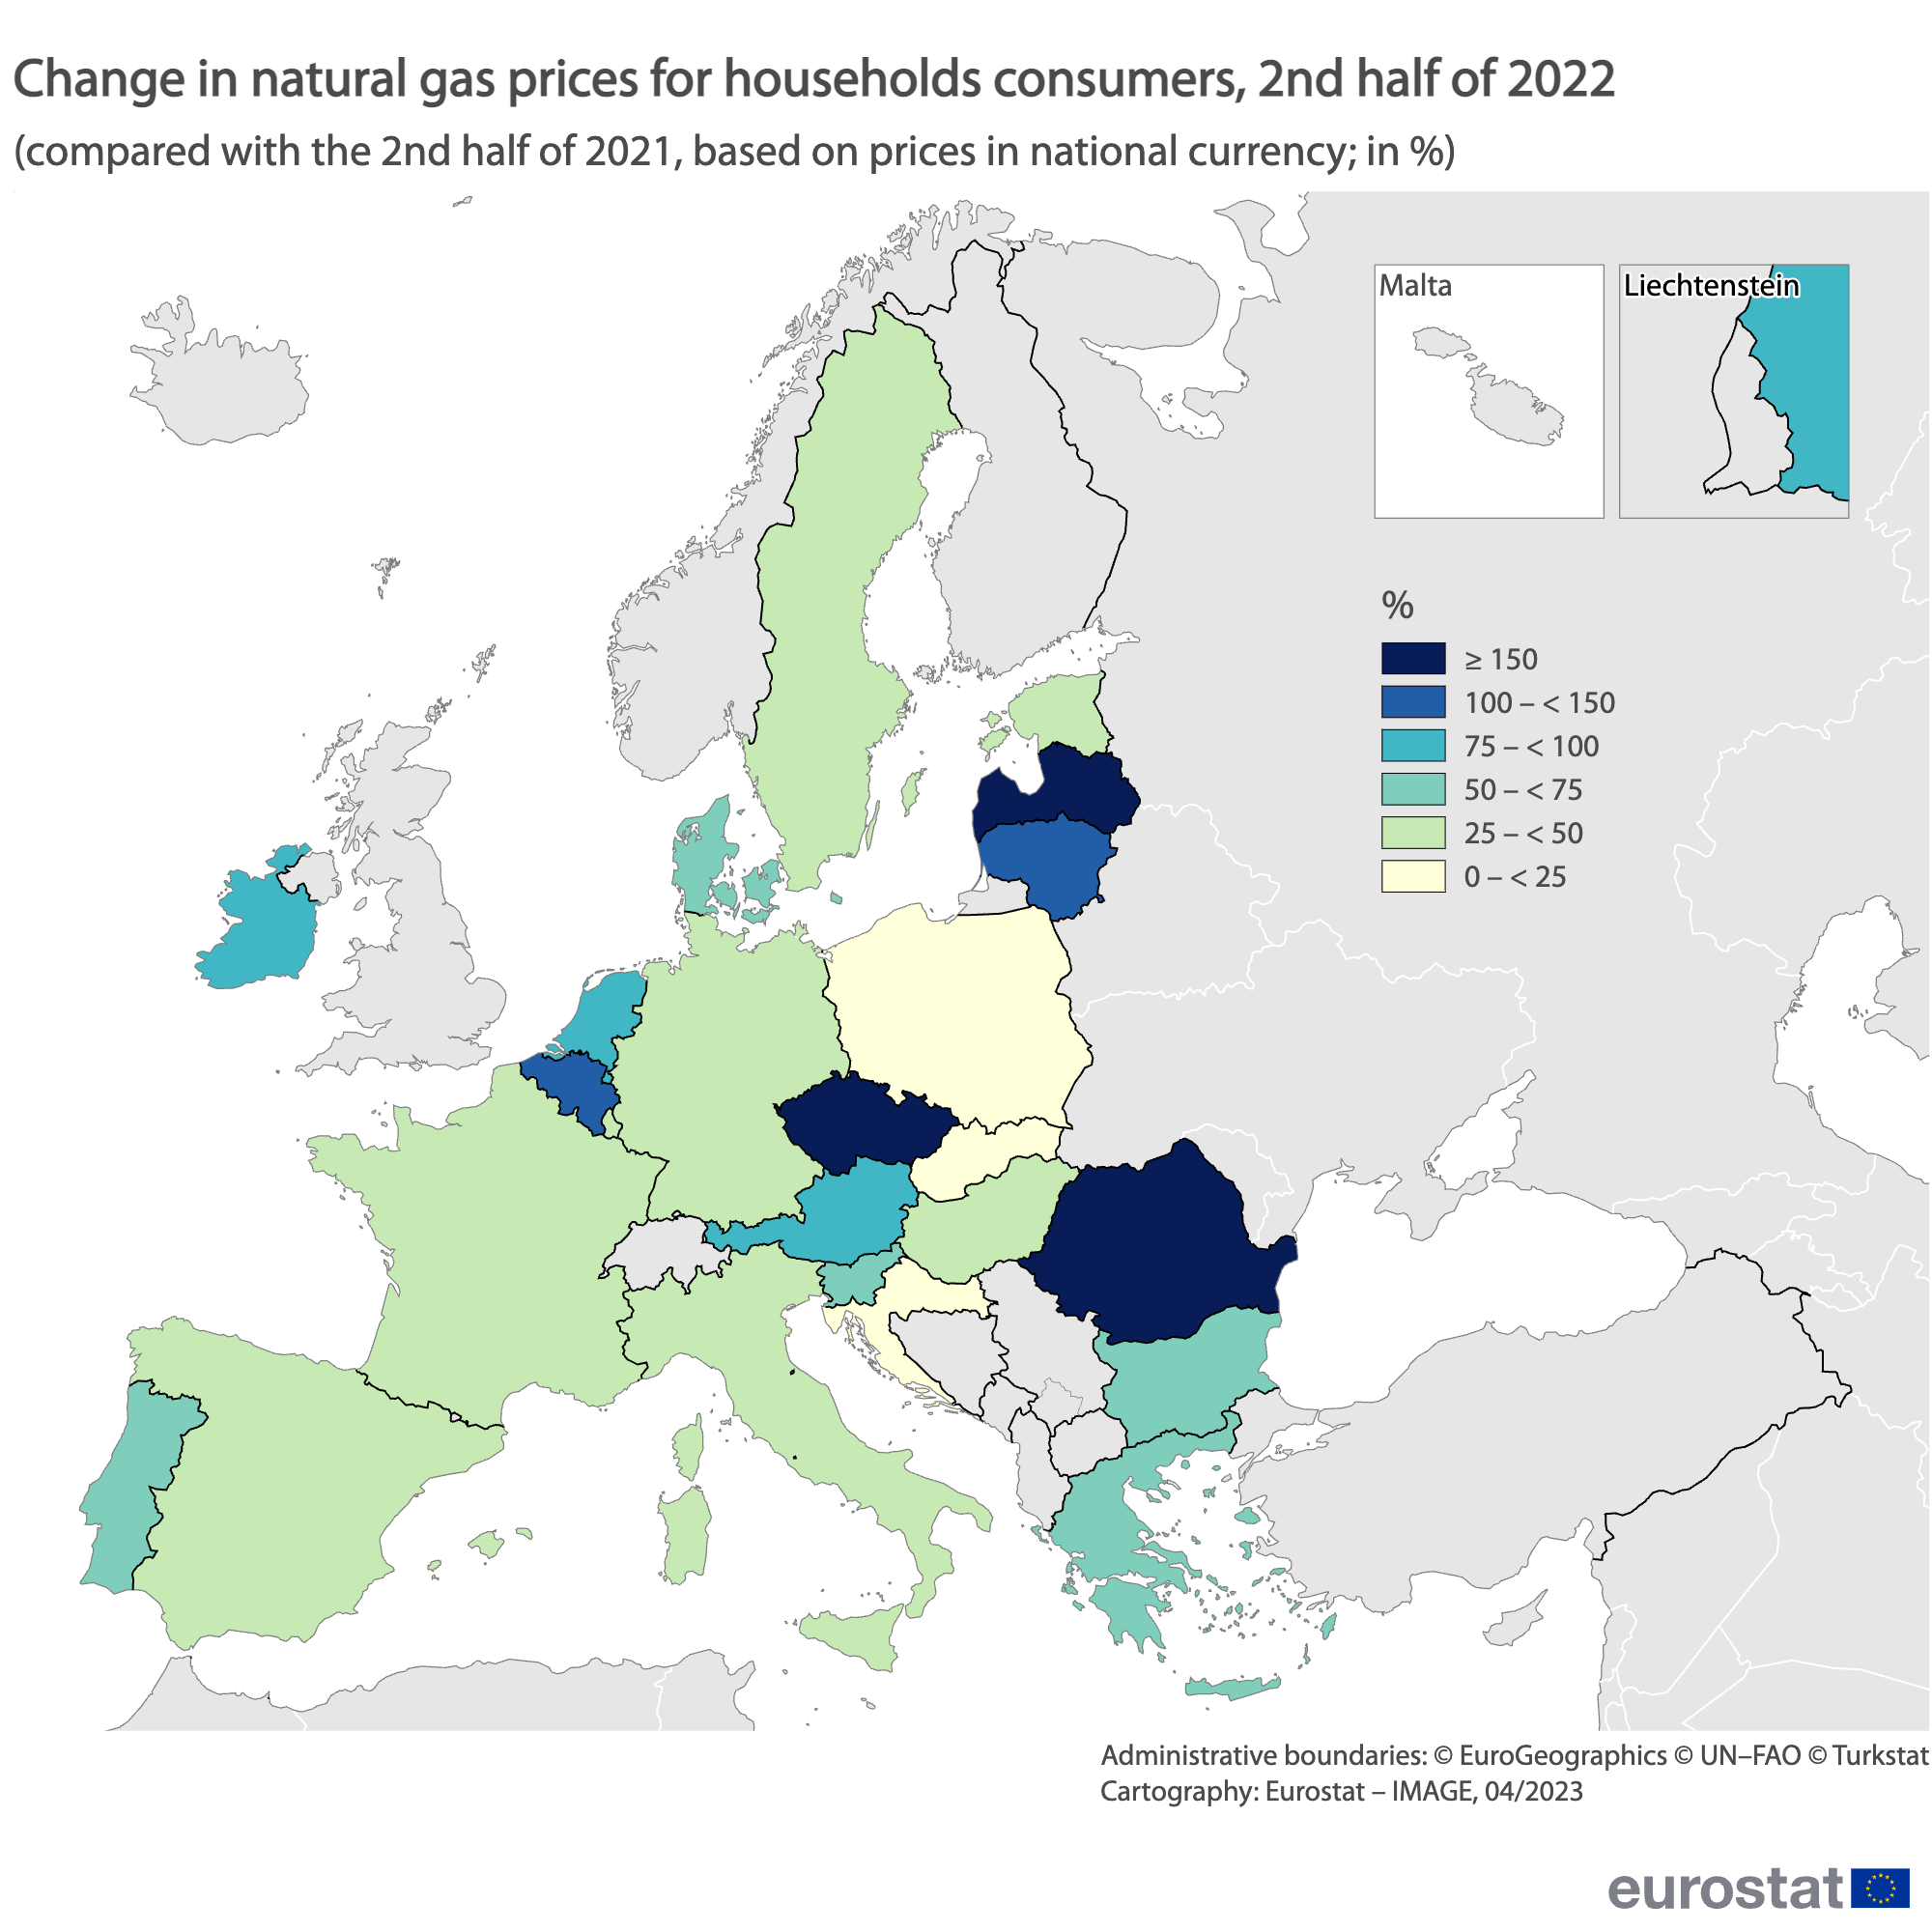 Map: change in natural gas prices, 2nd half of 2022 compared with 2nd half of 2021, based in national currencies, in %